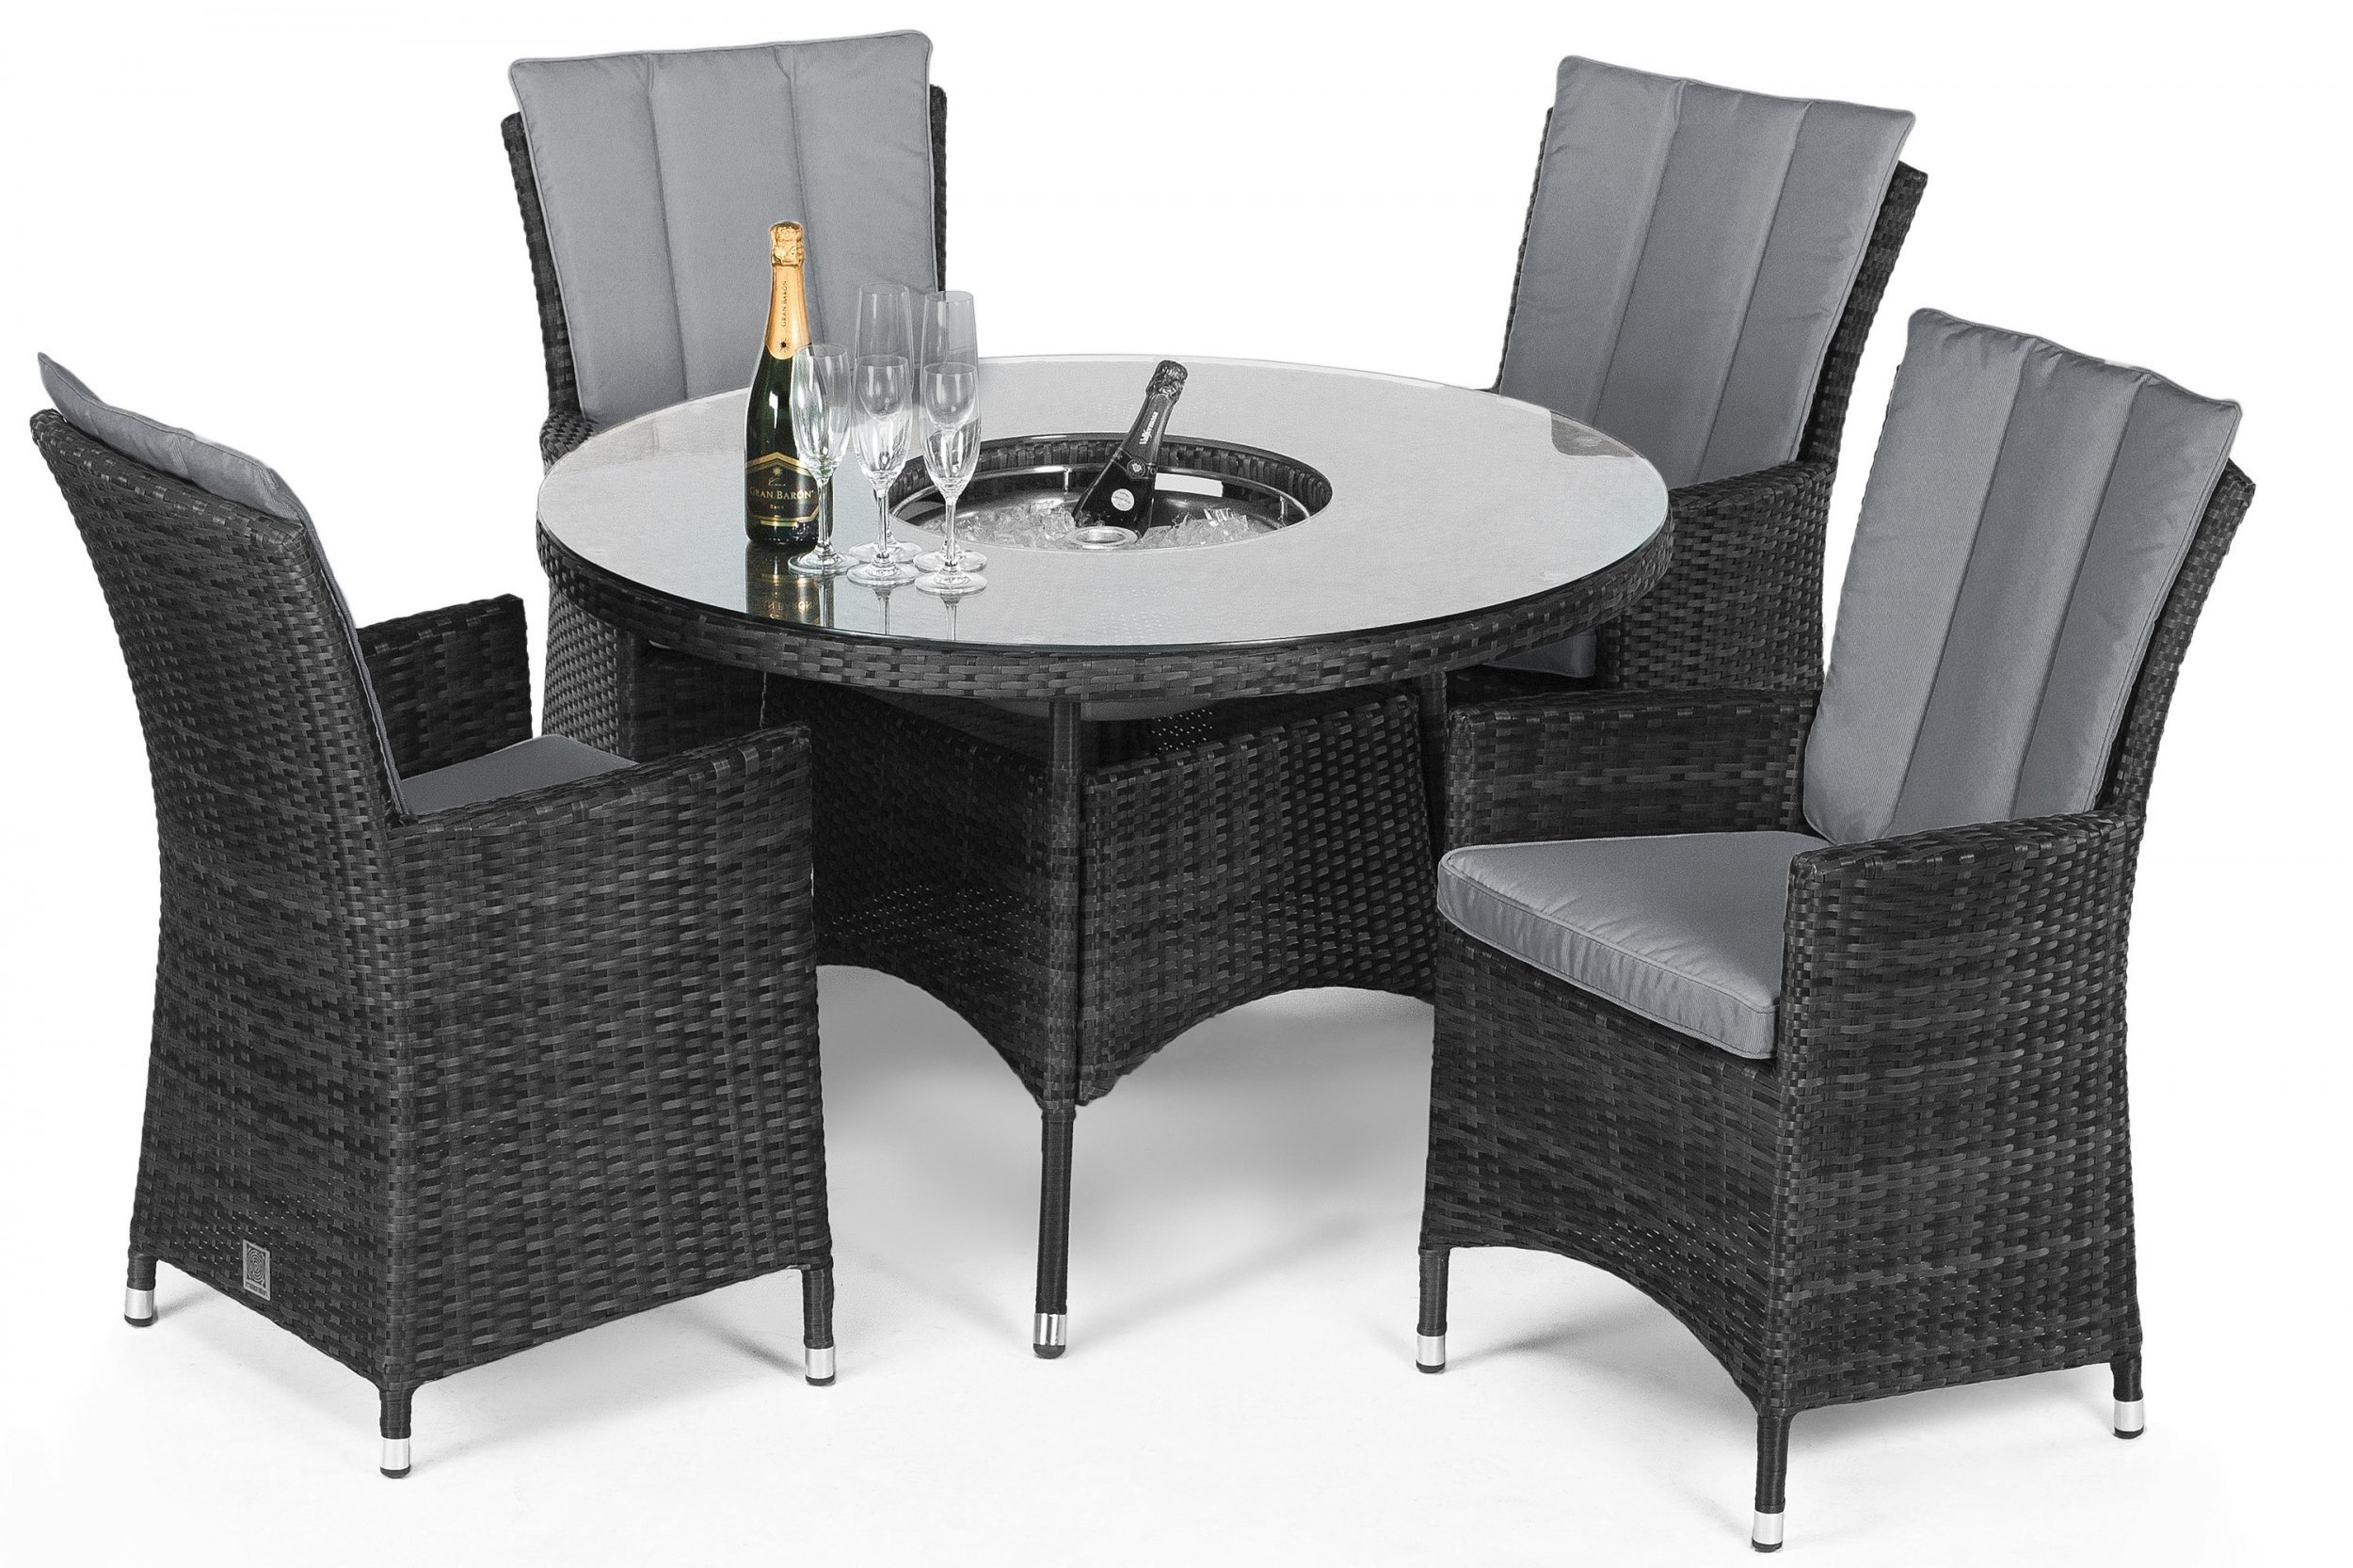 Maze Rattan LA 4 Seat Round Dining Set - Grey | The Clearance Zone